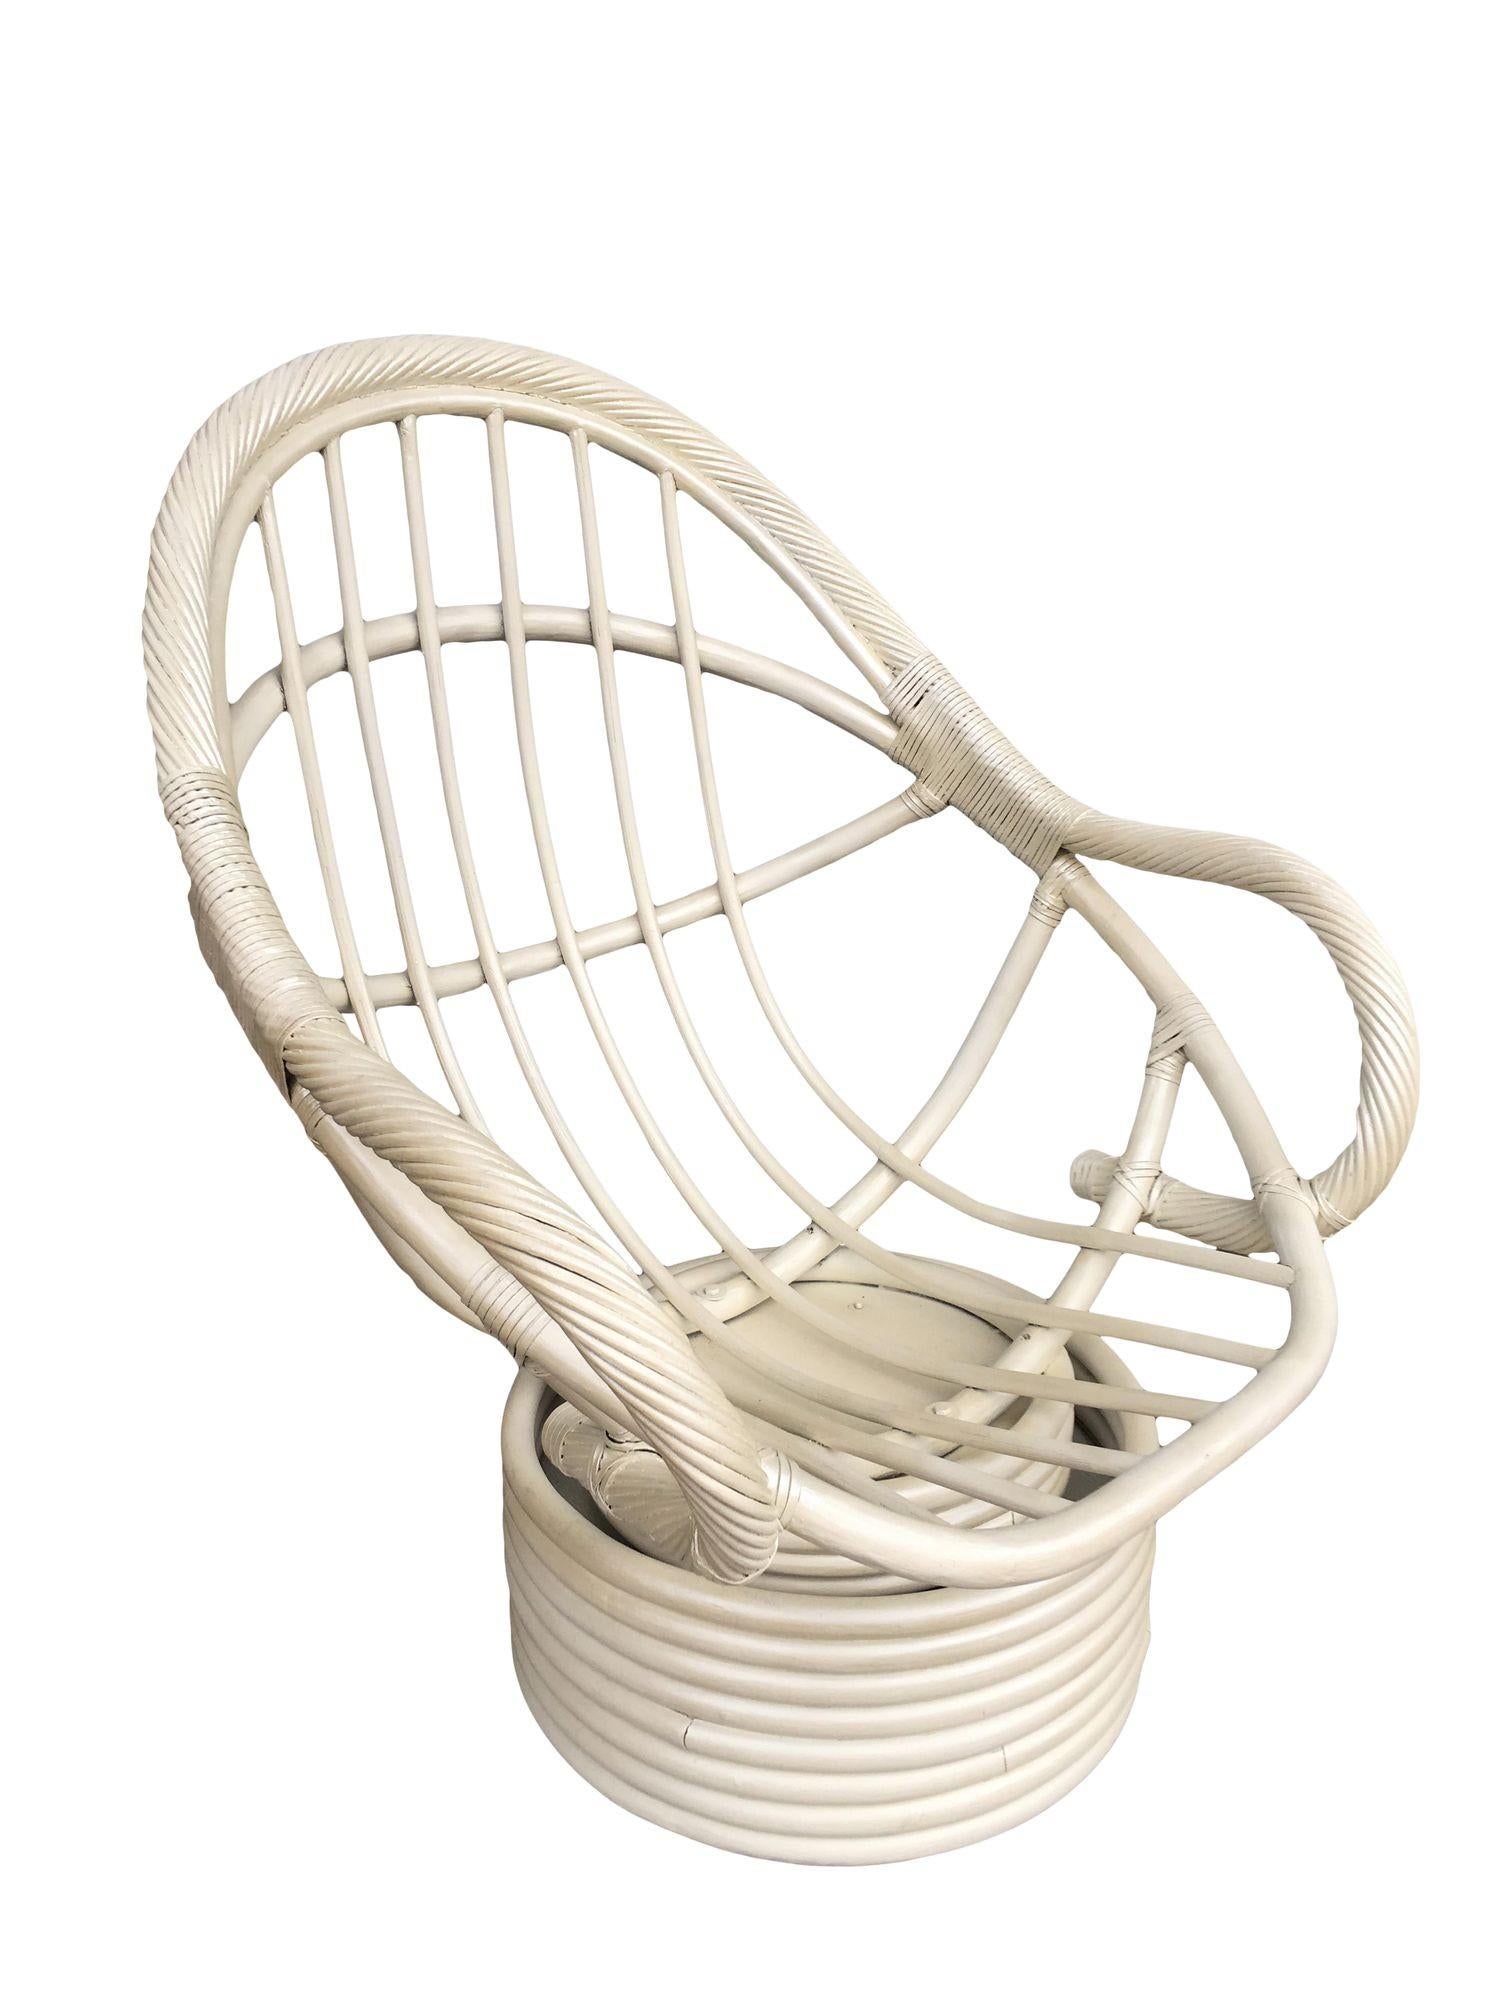 Classic rattan bucket seat featuring a circular height carved with two armrests fixed to a round stacked rattan swivel base. TThe chair has been repainted to its original white color and includes a yellow foam seat.

1970, United States

We only